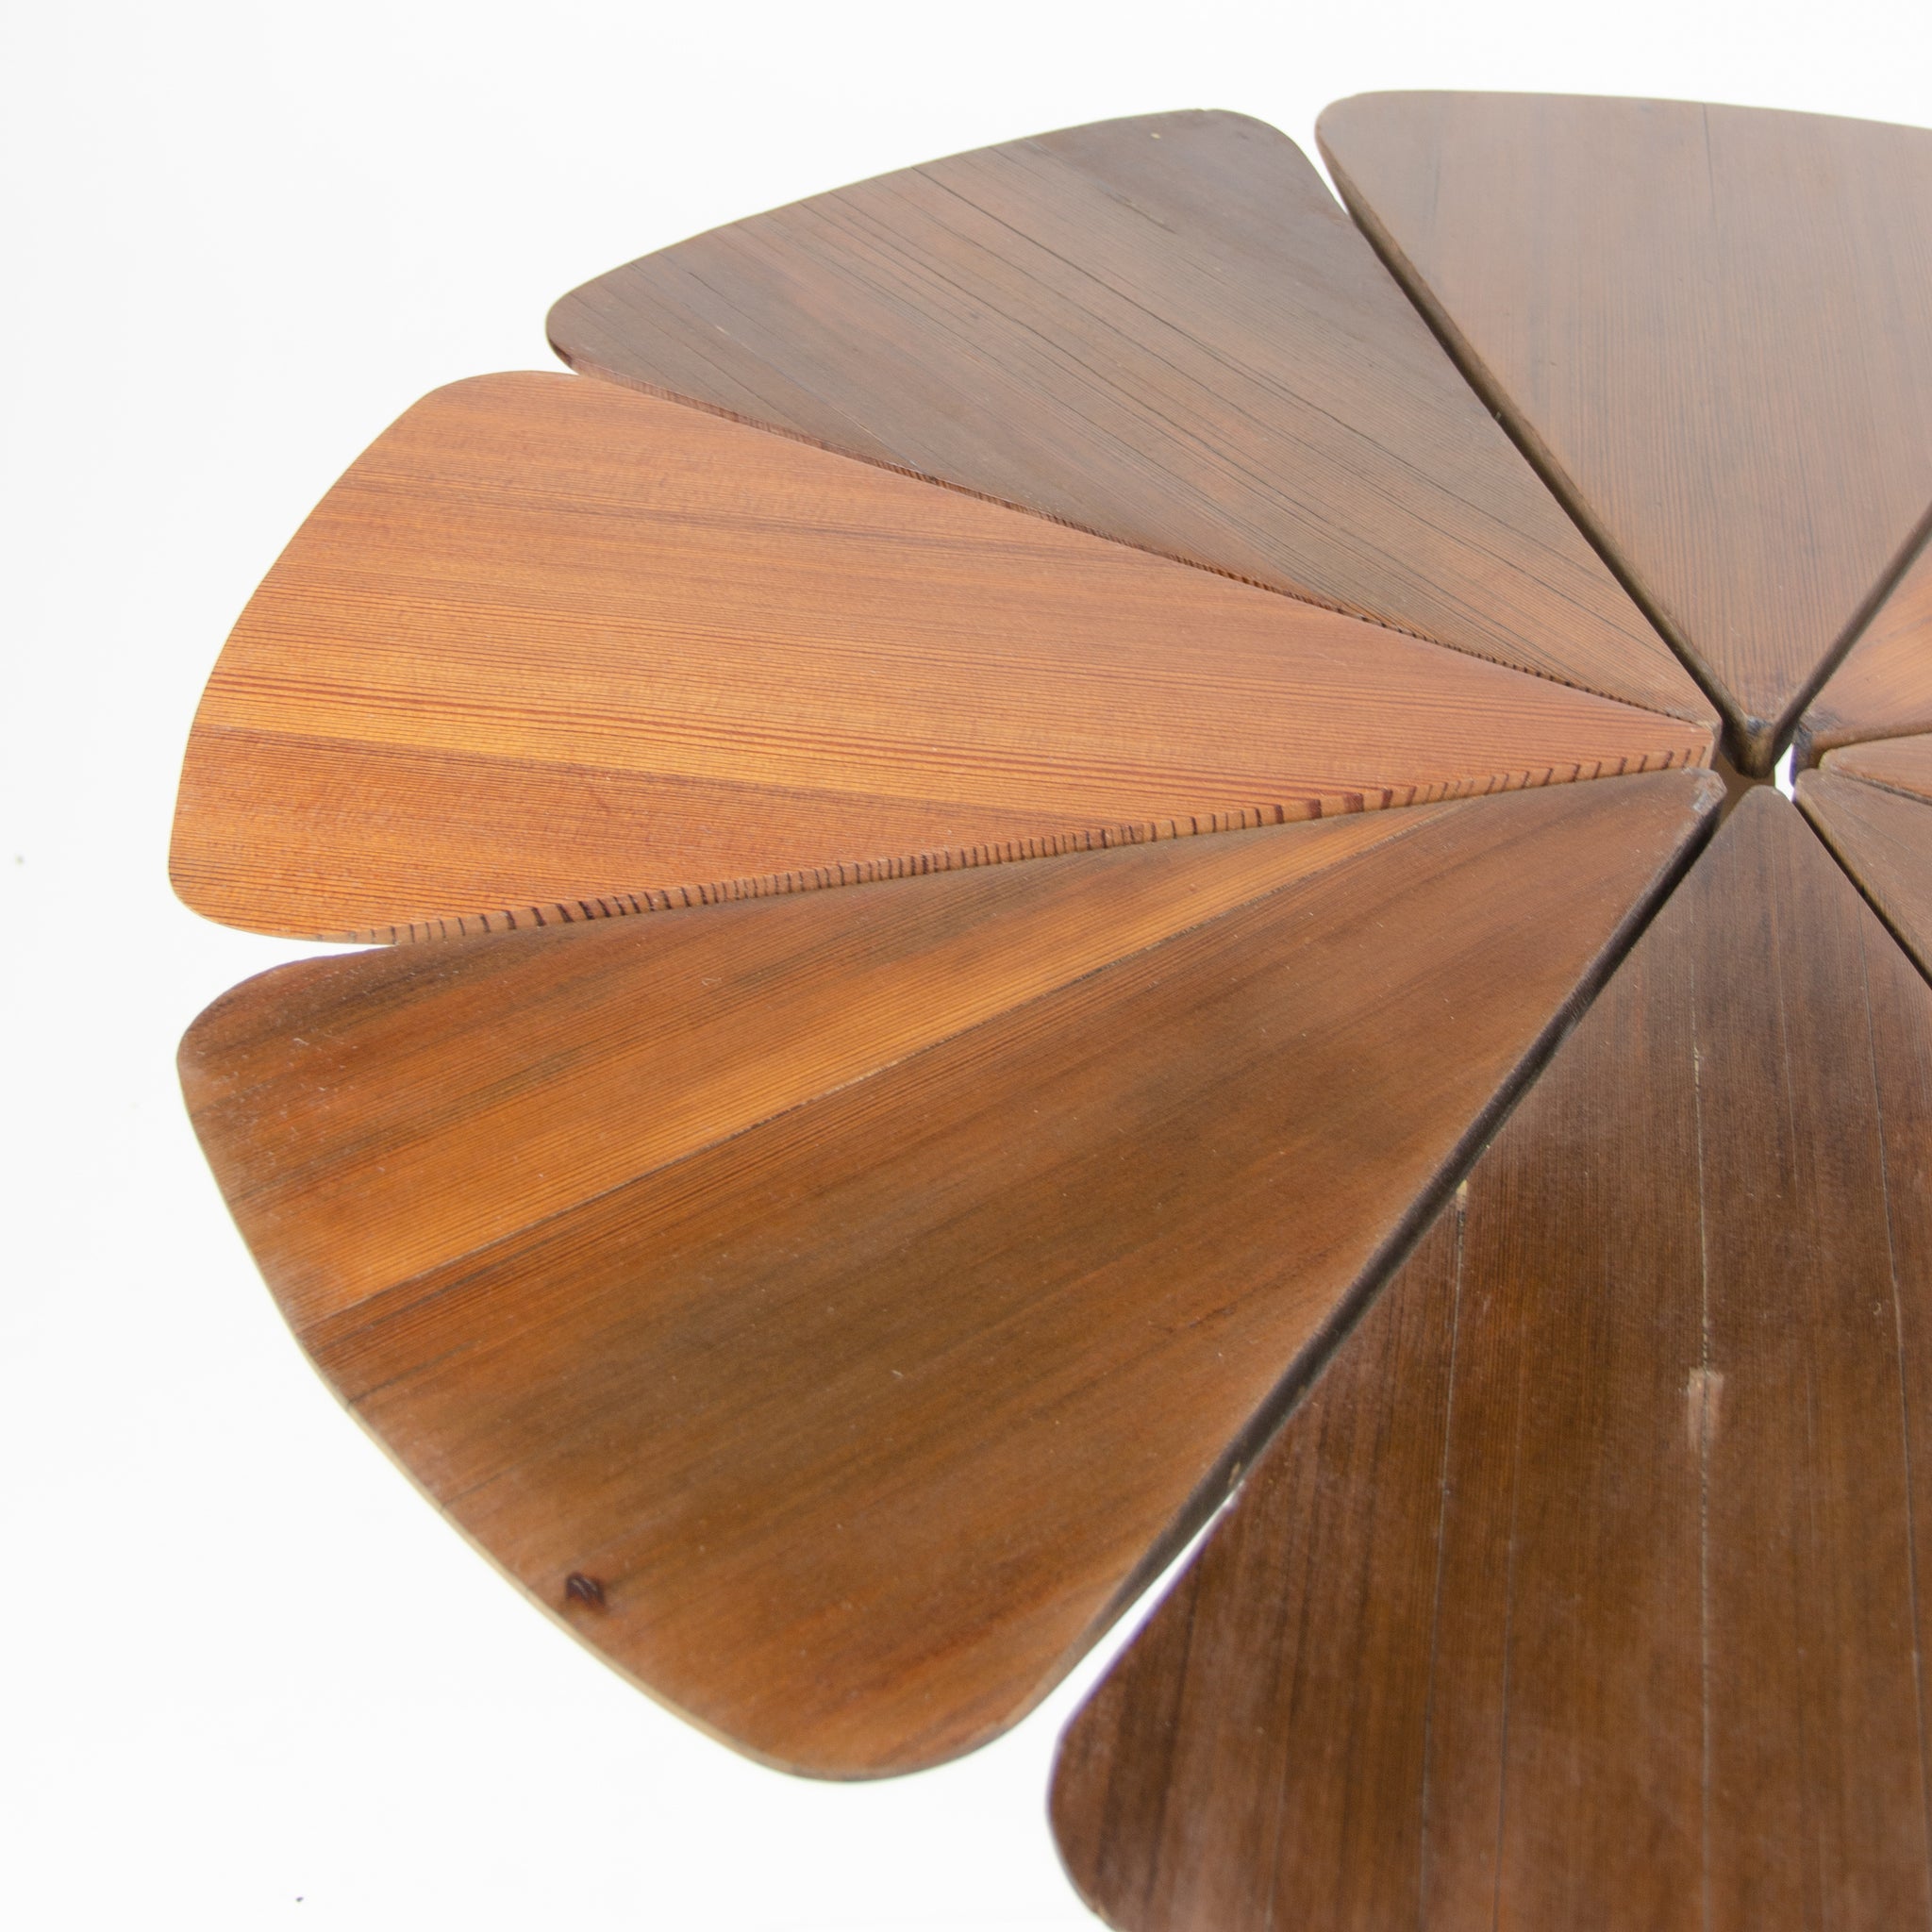 1960s Petal Dining Table by Richard Schultz For Knoll International Vintage Redwood